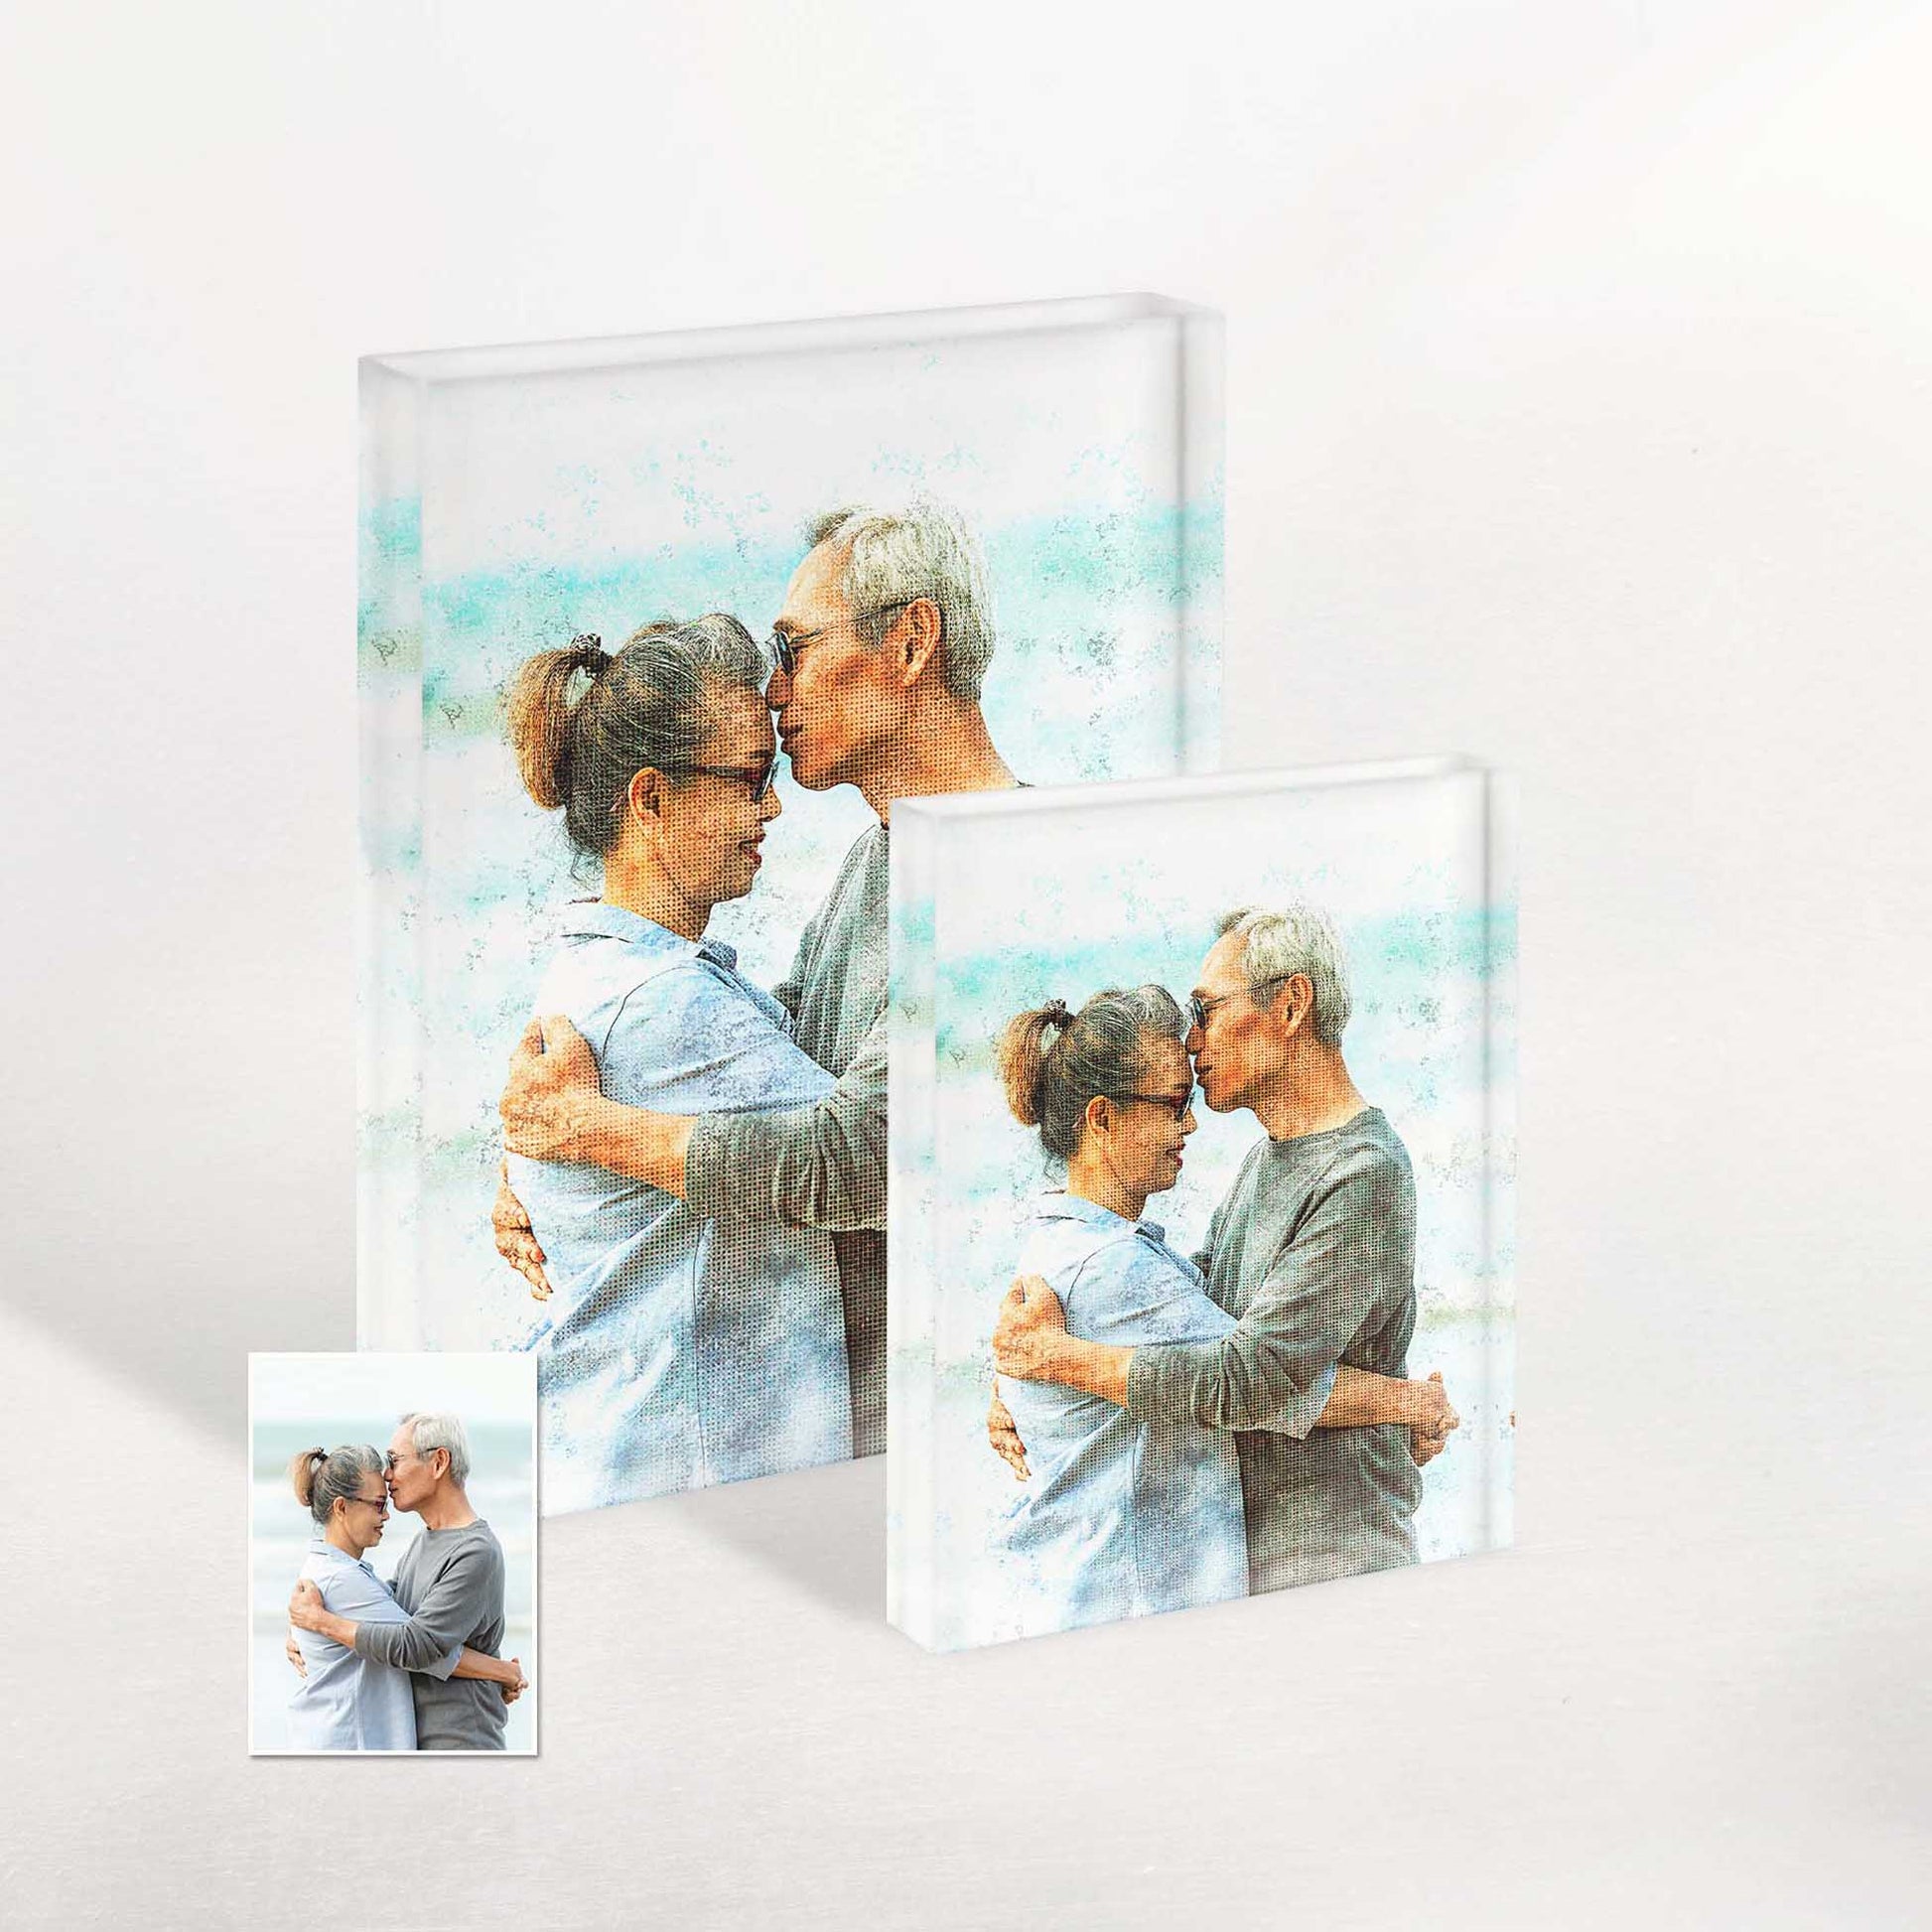 Personalised Grunge FX Acrylic Block Photo: A testament to originality and nostalgia. Its halftone design adds a unique and creative touch, making it a standout piece in any home decor